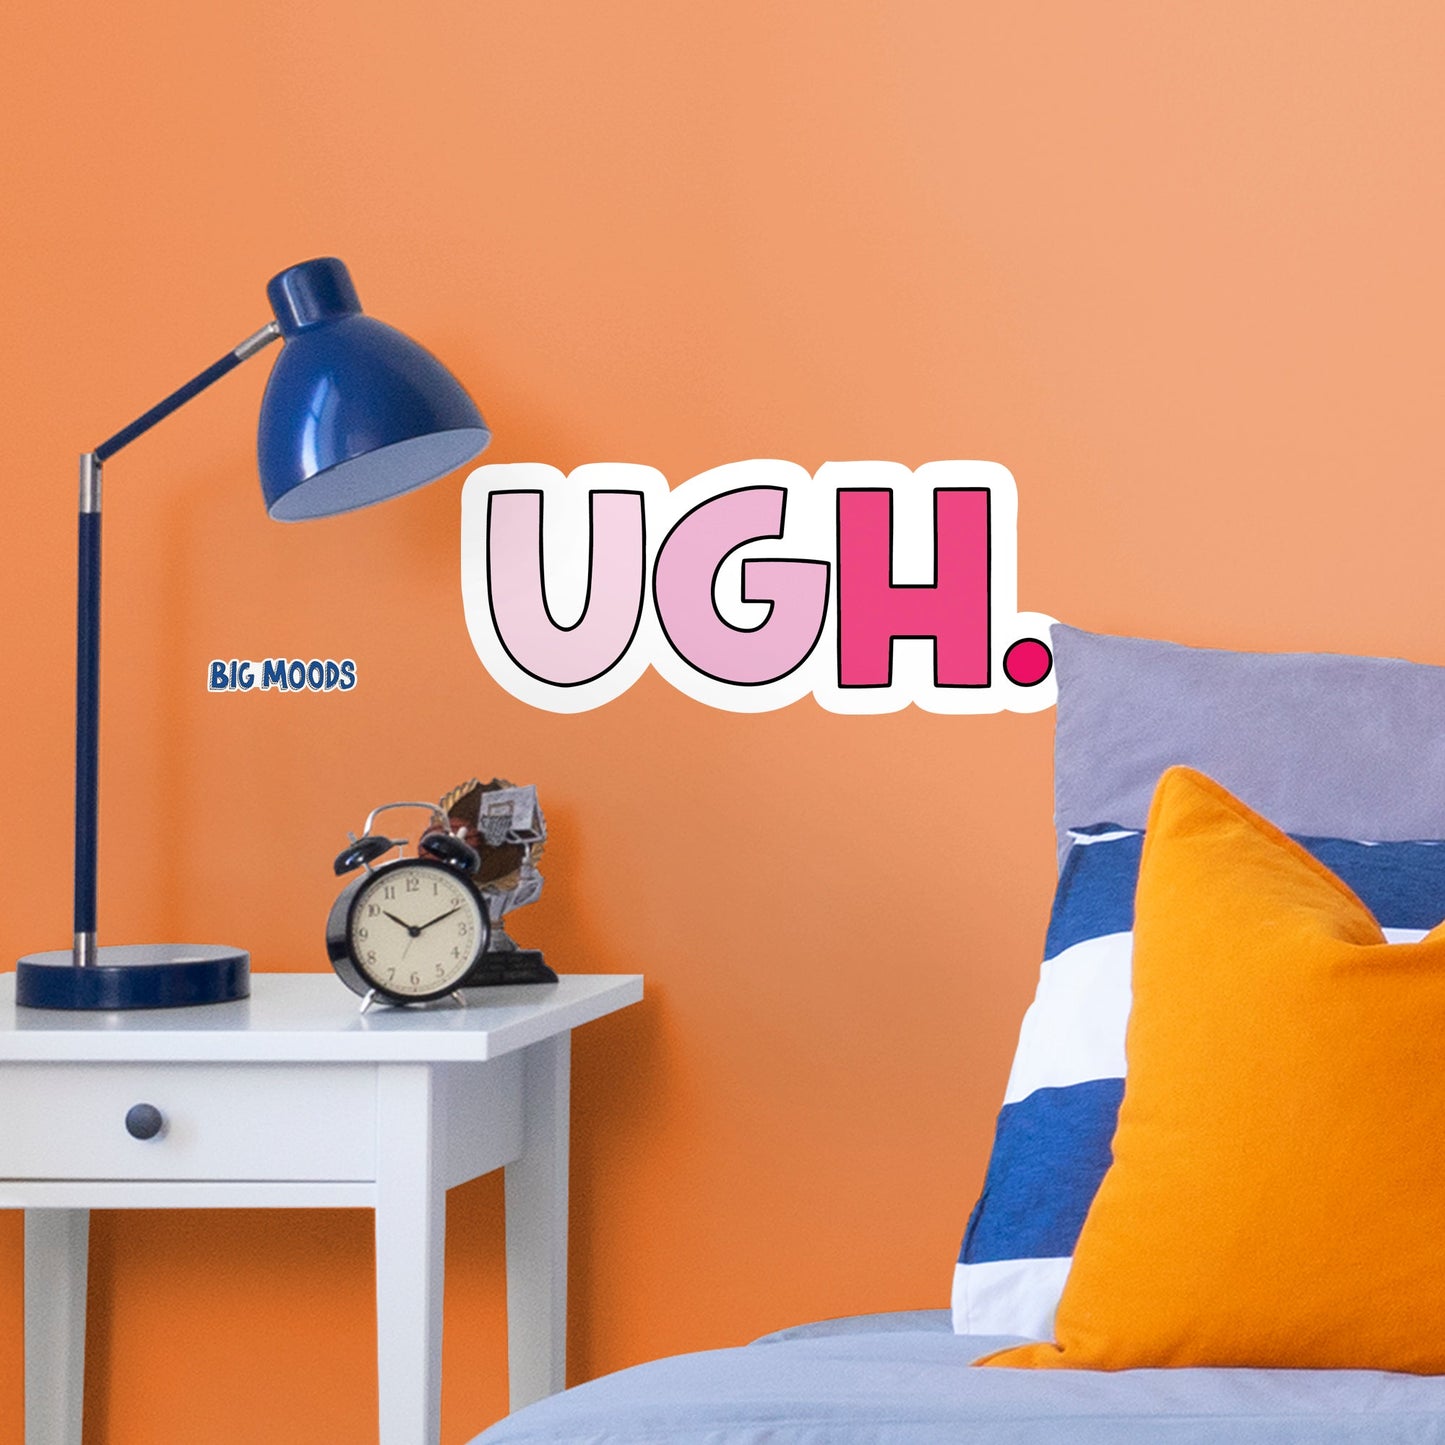 Ugh (Pink)        - Officially Licensed Big Moods Removable     Adhesive Decal